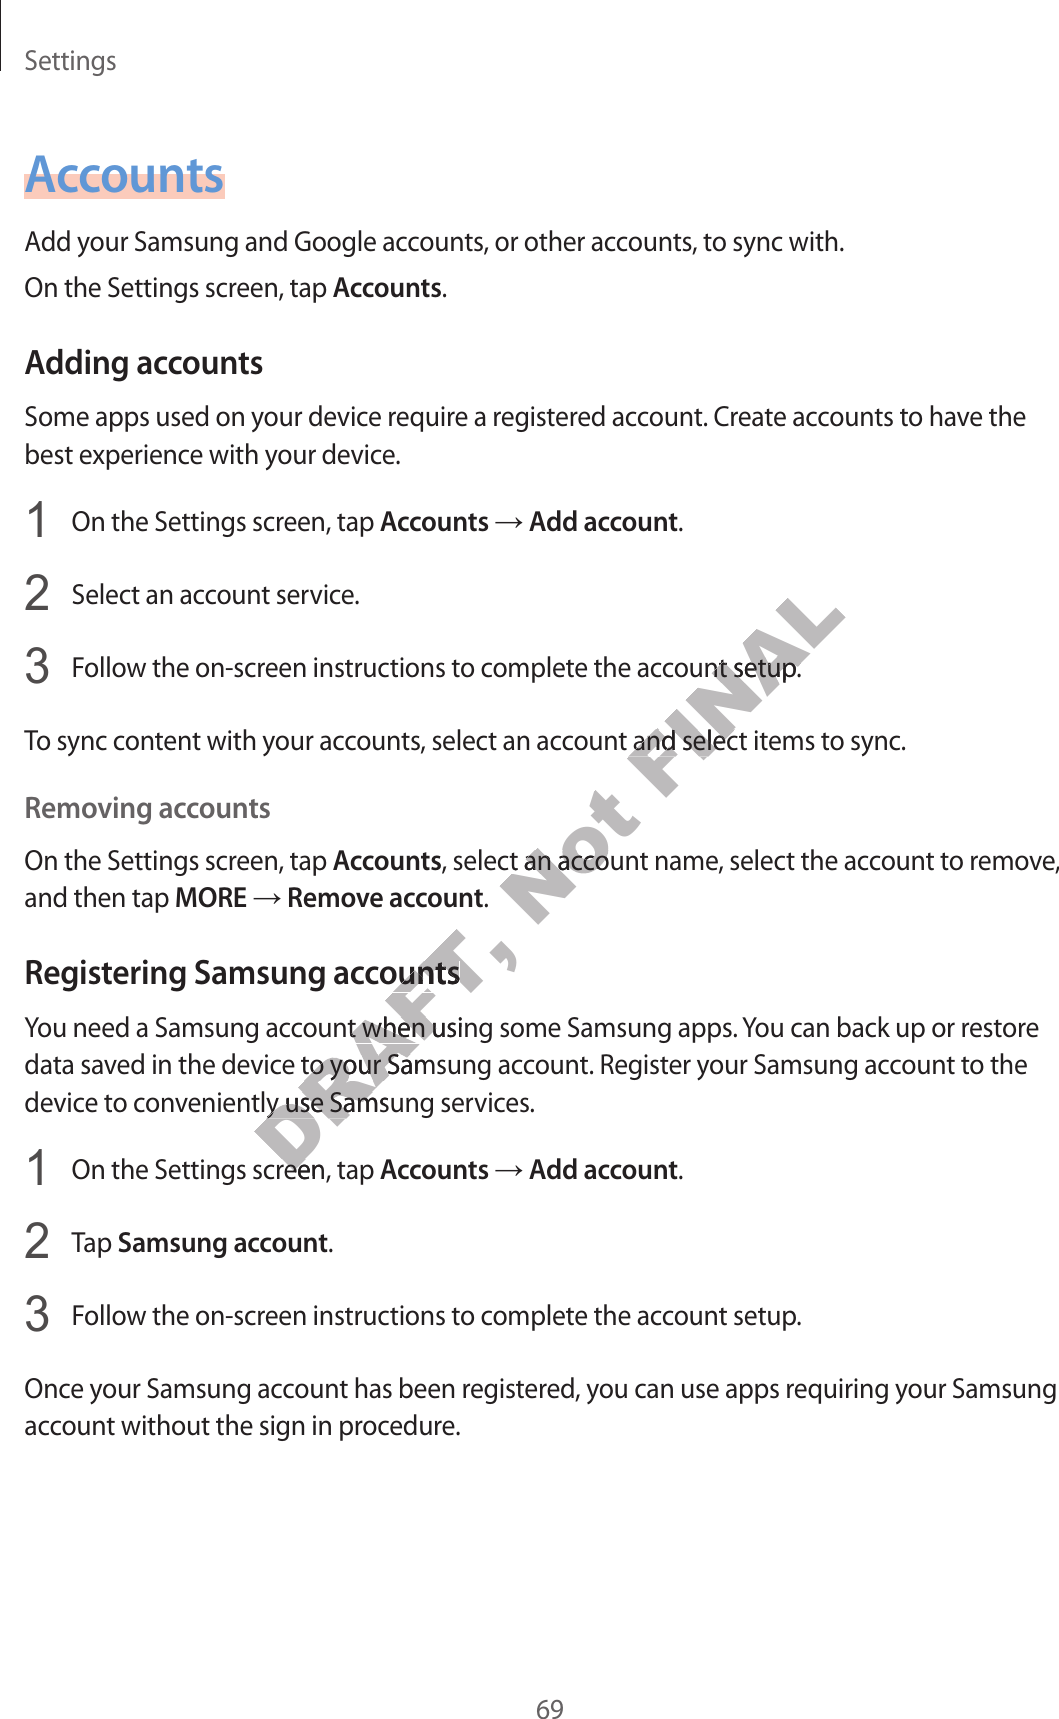 Settings69AccountsAdd your Samsung and Google accounts, or other accounts, to sync with.On the Settings screen, tap Accounts.Adding accountsSome apps used on your device require a registered account. Create accounts to have the best experience with your device.1  On the Settings screen, tap Accounts → Add account.2  Select an account service.3  Follow the on-screen instructions to complete the account setup.To sync content with your accounts, select an account and select items to sync.Removing accountsOn the Settings screen, tap Accounts, select an account name, select the account to remove, and then tap MORE → Remove account.Registering Samsung accountsYou need a Samsung account when using some Samsung apps. You can back up or restore data saved in the device to your Samsung account. Register your Samsung account to the device to conveniently use Samsung services.1  On the Settings screen, tap Accounts → Add account.2  Tap Samsung account.3  Follow the on-screen instructions to complete the account setup.Once your Samsung account has been registered, you can use apps requiring your Samsung account without the sign in procedure.DRAFT, countscountsount when using some Sount when using some Se to your Samsung ace to your Samsung aceniently use Samsung sereniently use Samsung serettings screen, tap ettings screen, tap Not , select an accoun, select an accounFINALount setup.ount setup.ount and select itount and select it